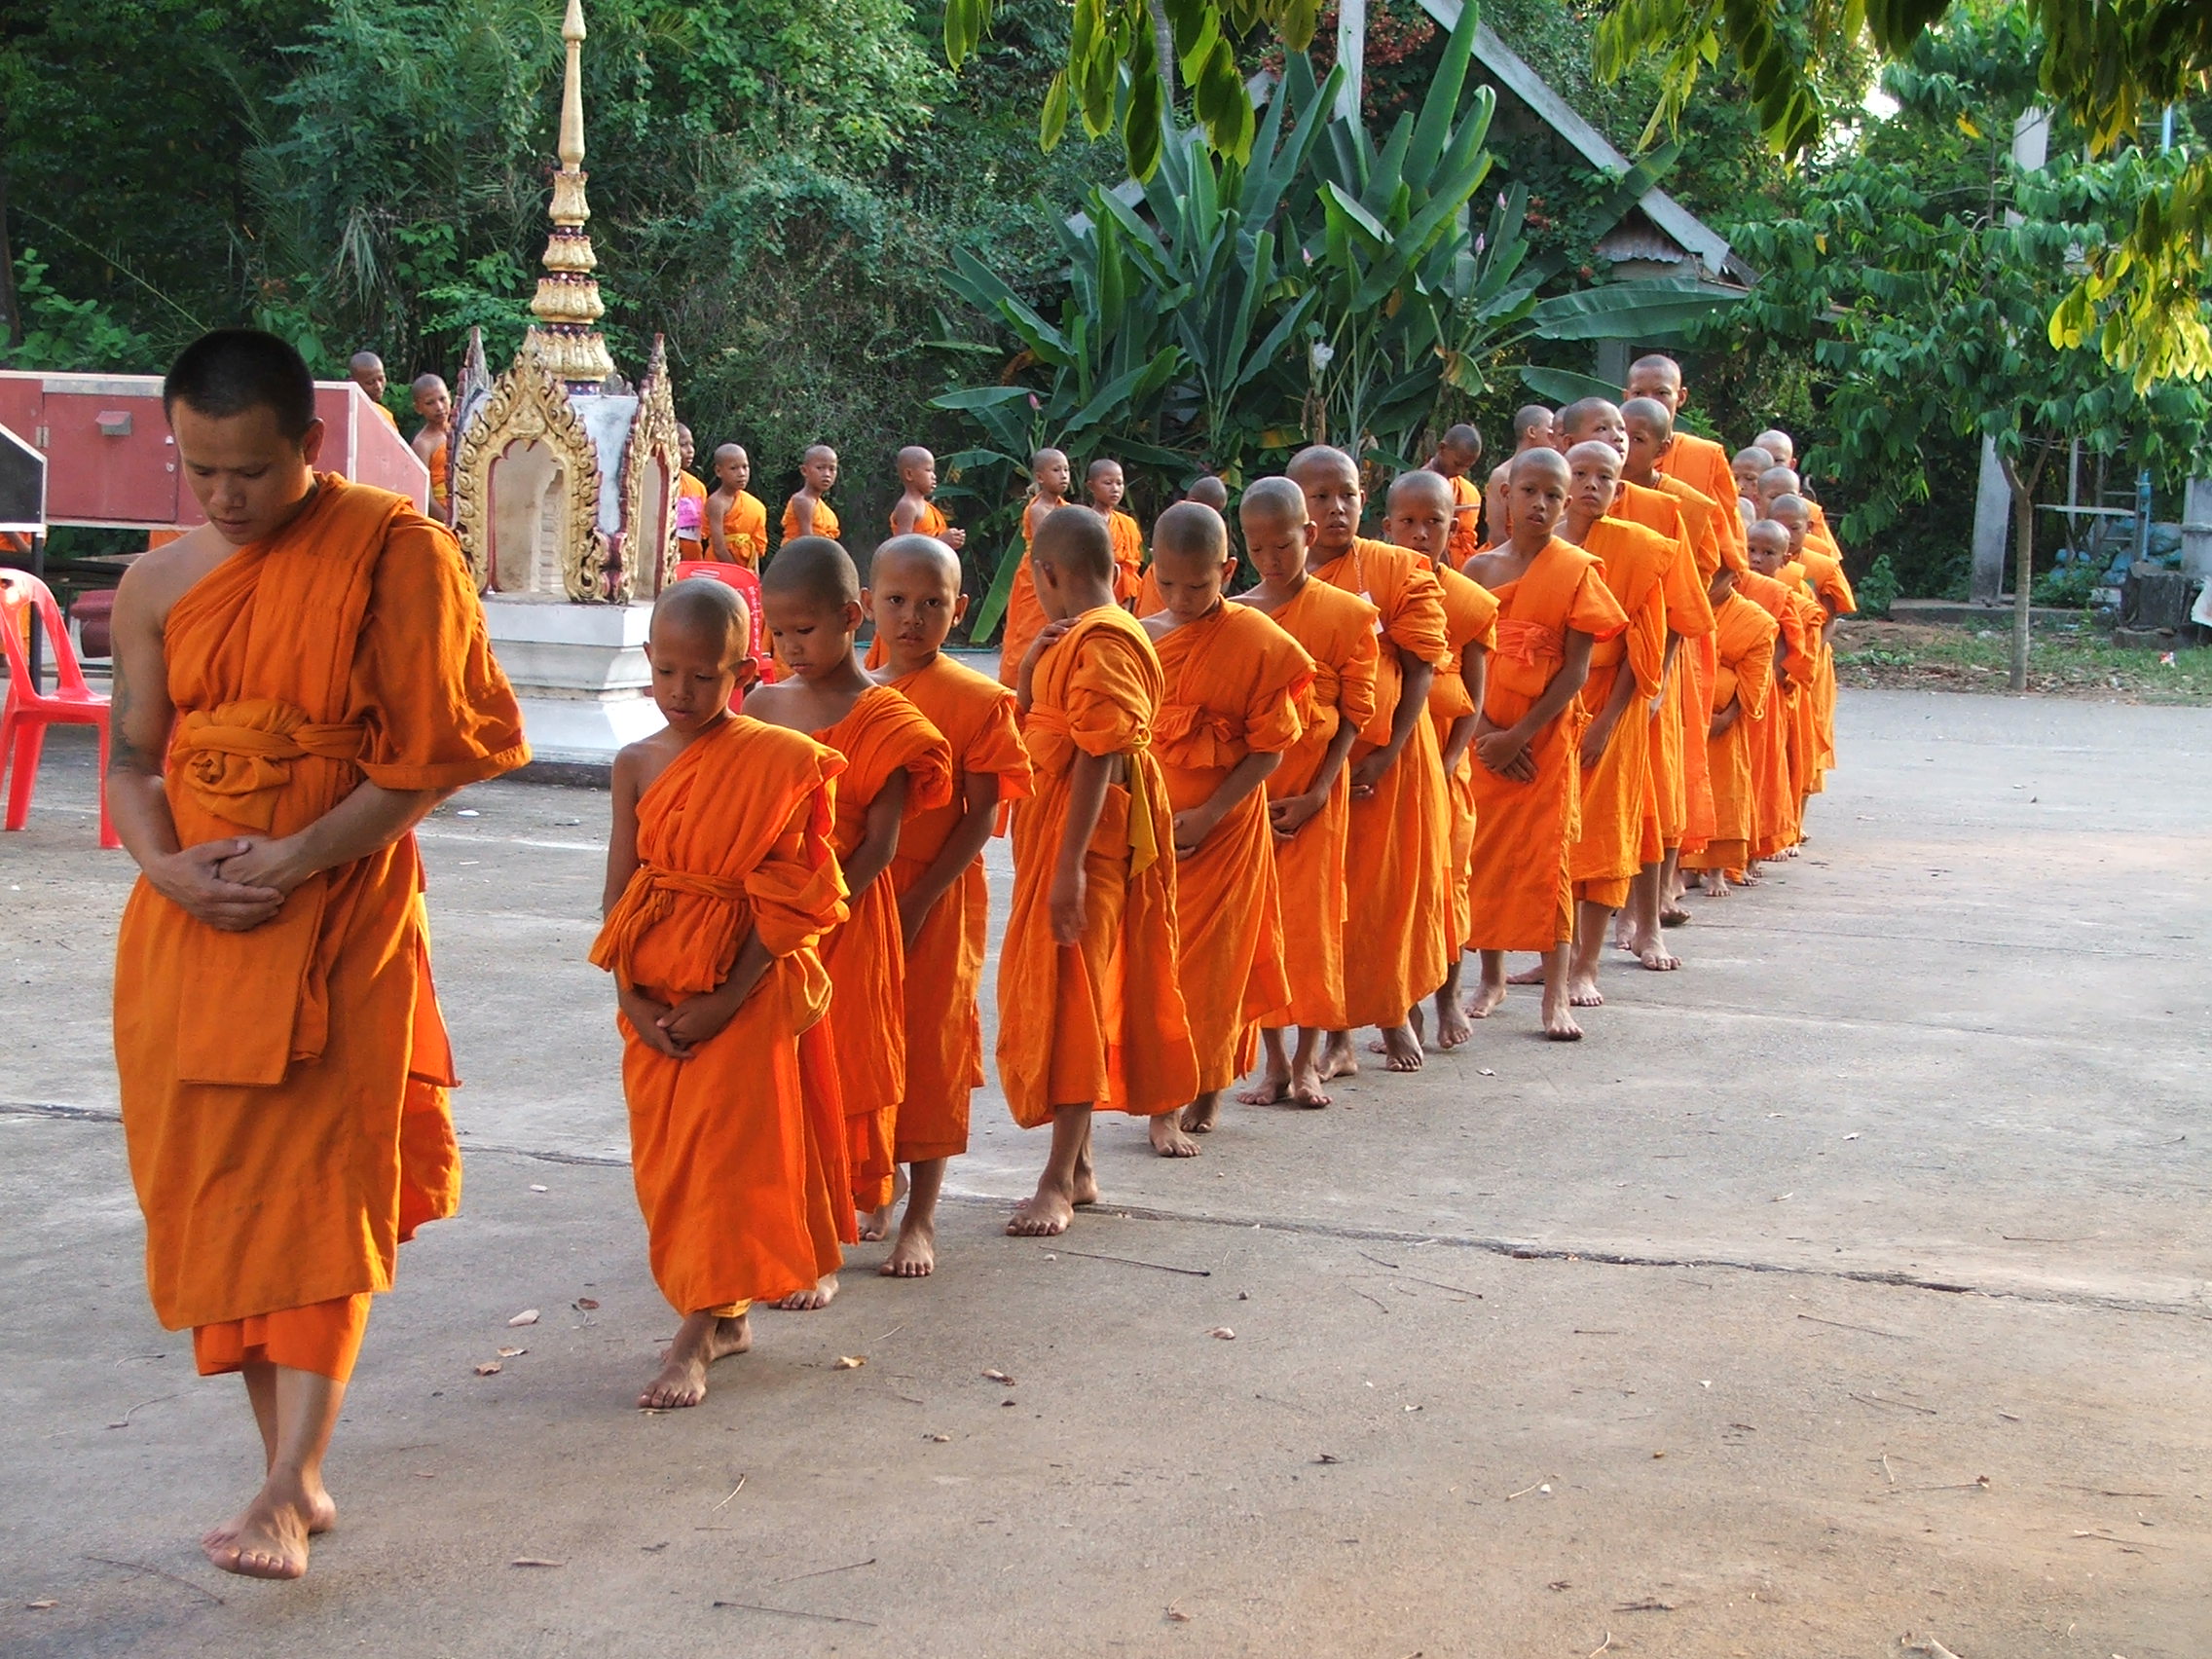 Novice in the Buddhist religion faculty is walking back and forth